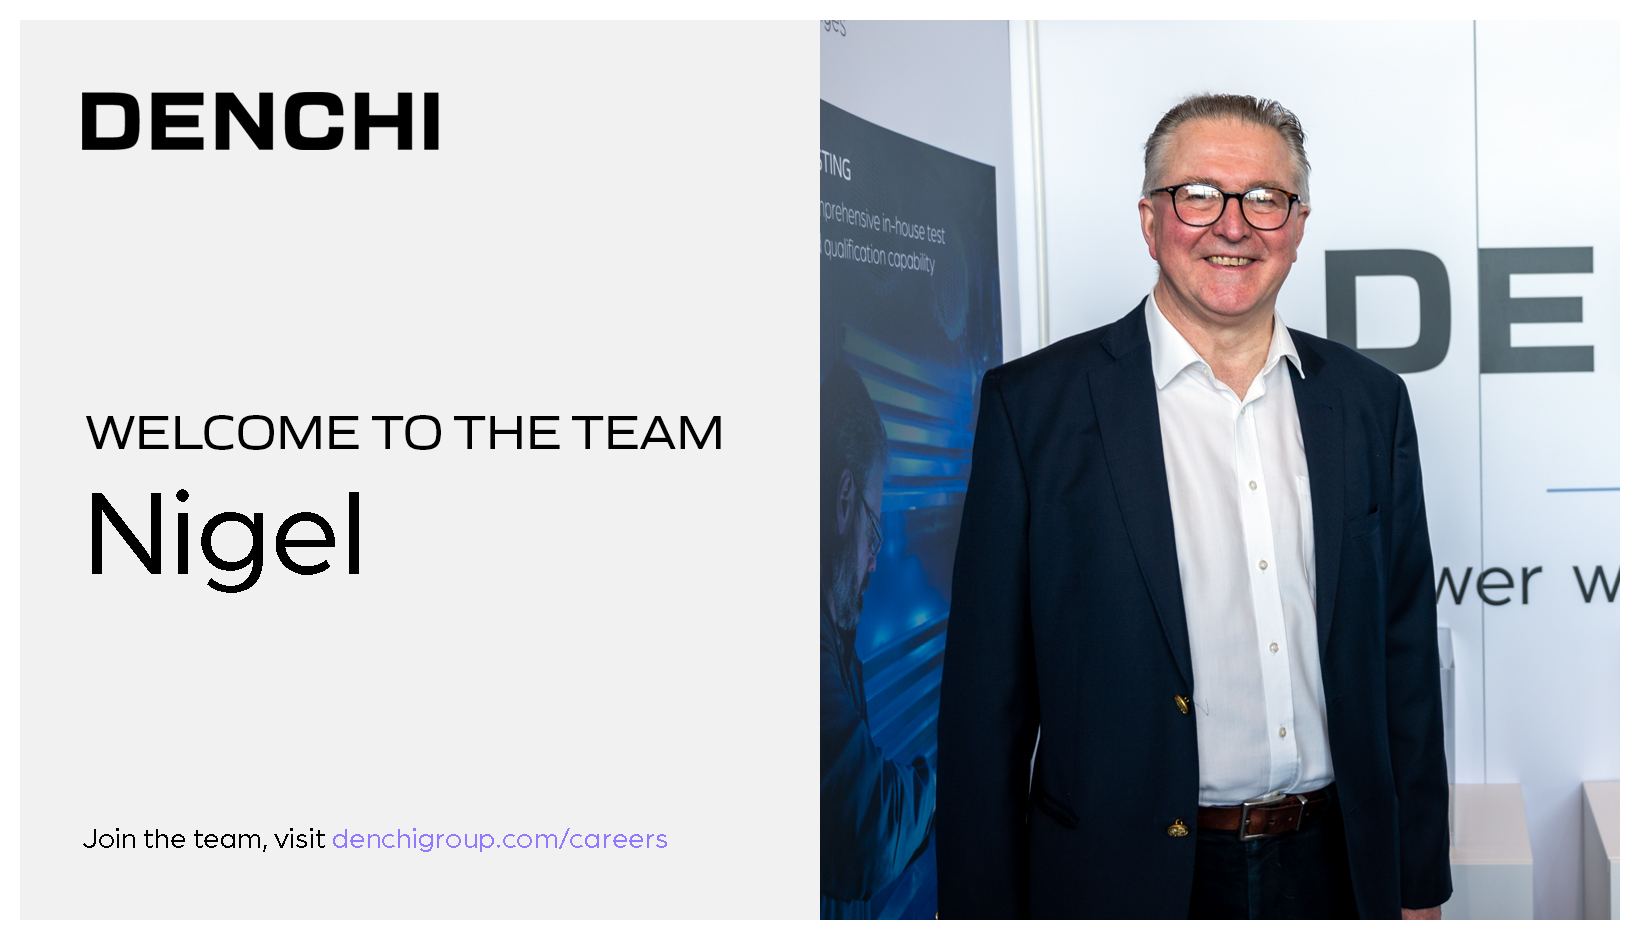 Nigel Scott announced as the new CEO of Denchi